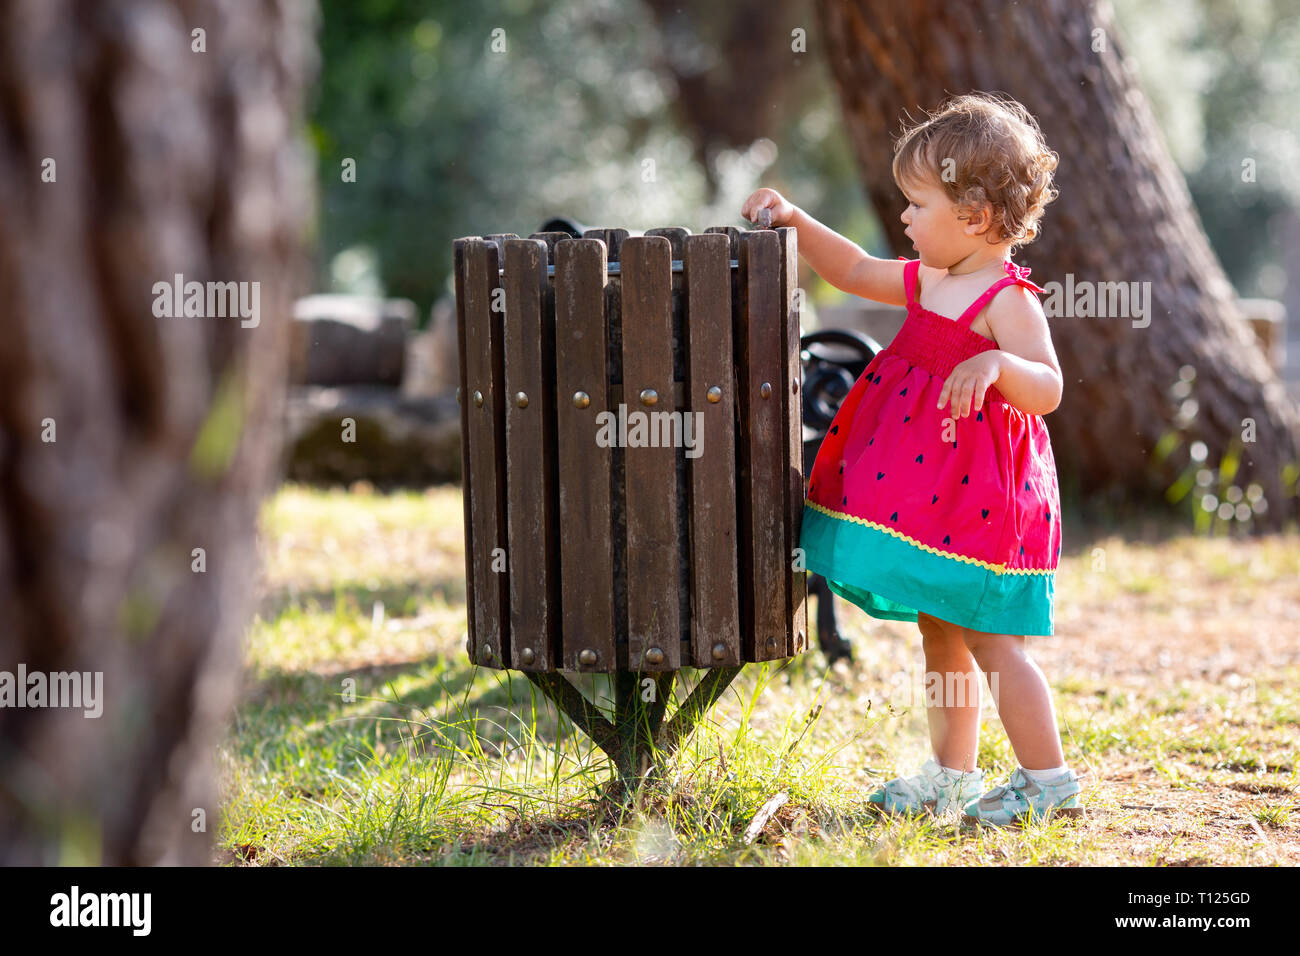 Sweet blond little baby girl throwing garbage into recycle bin Stock Photo